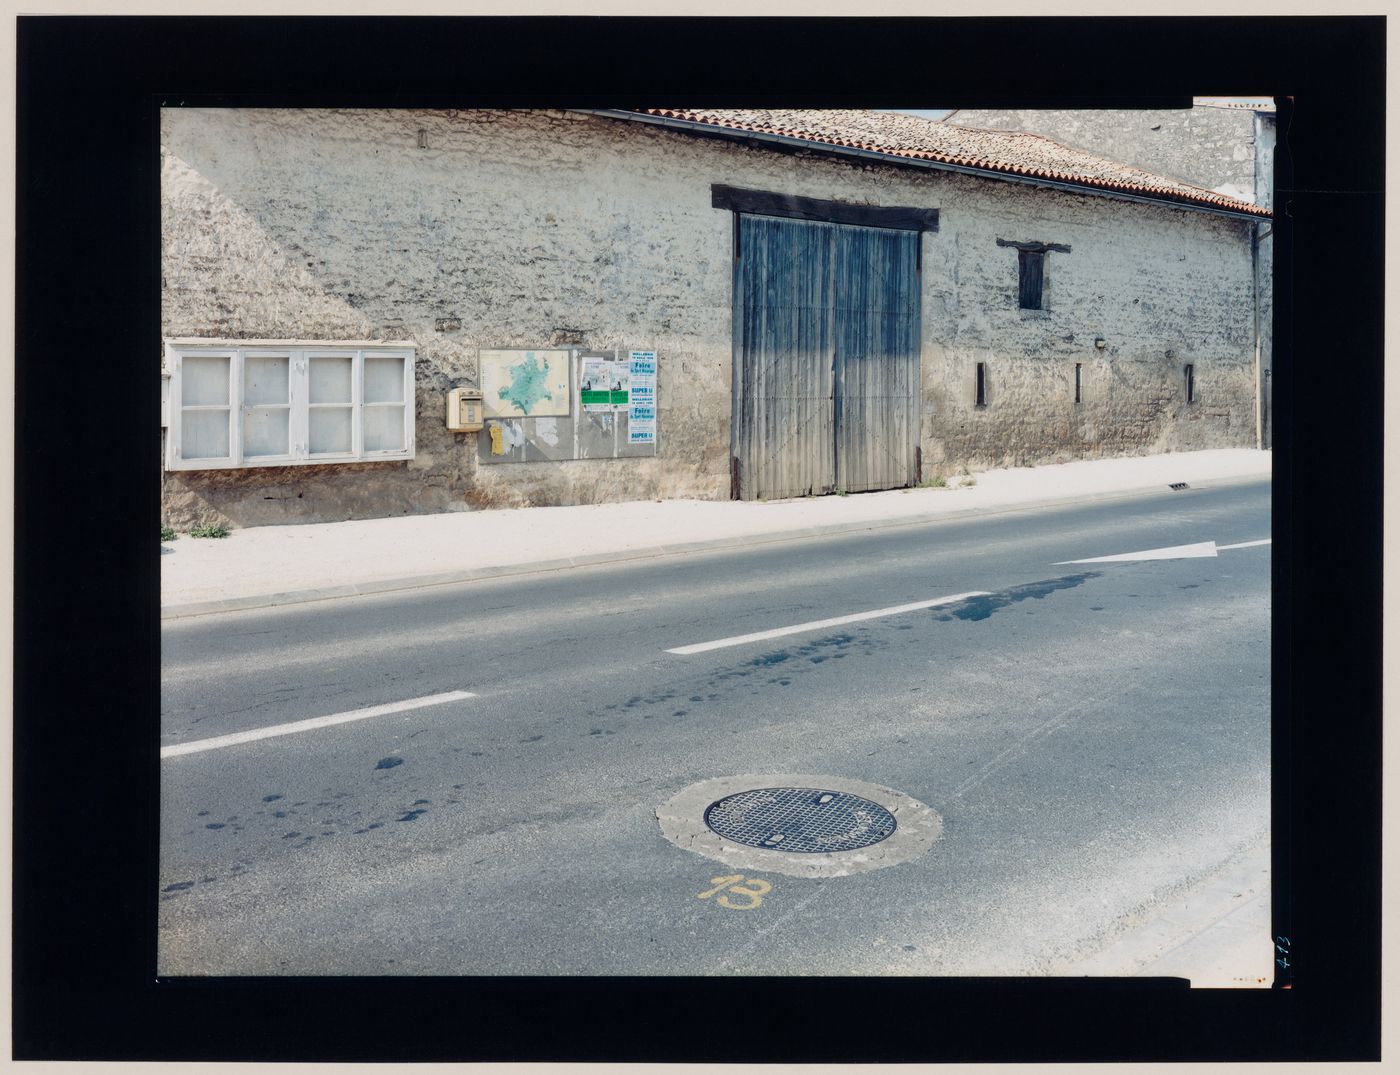 View of a stone building with wooden doors and a street, Dax, France (from the series "In between cities")